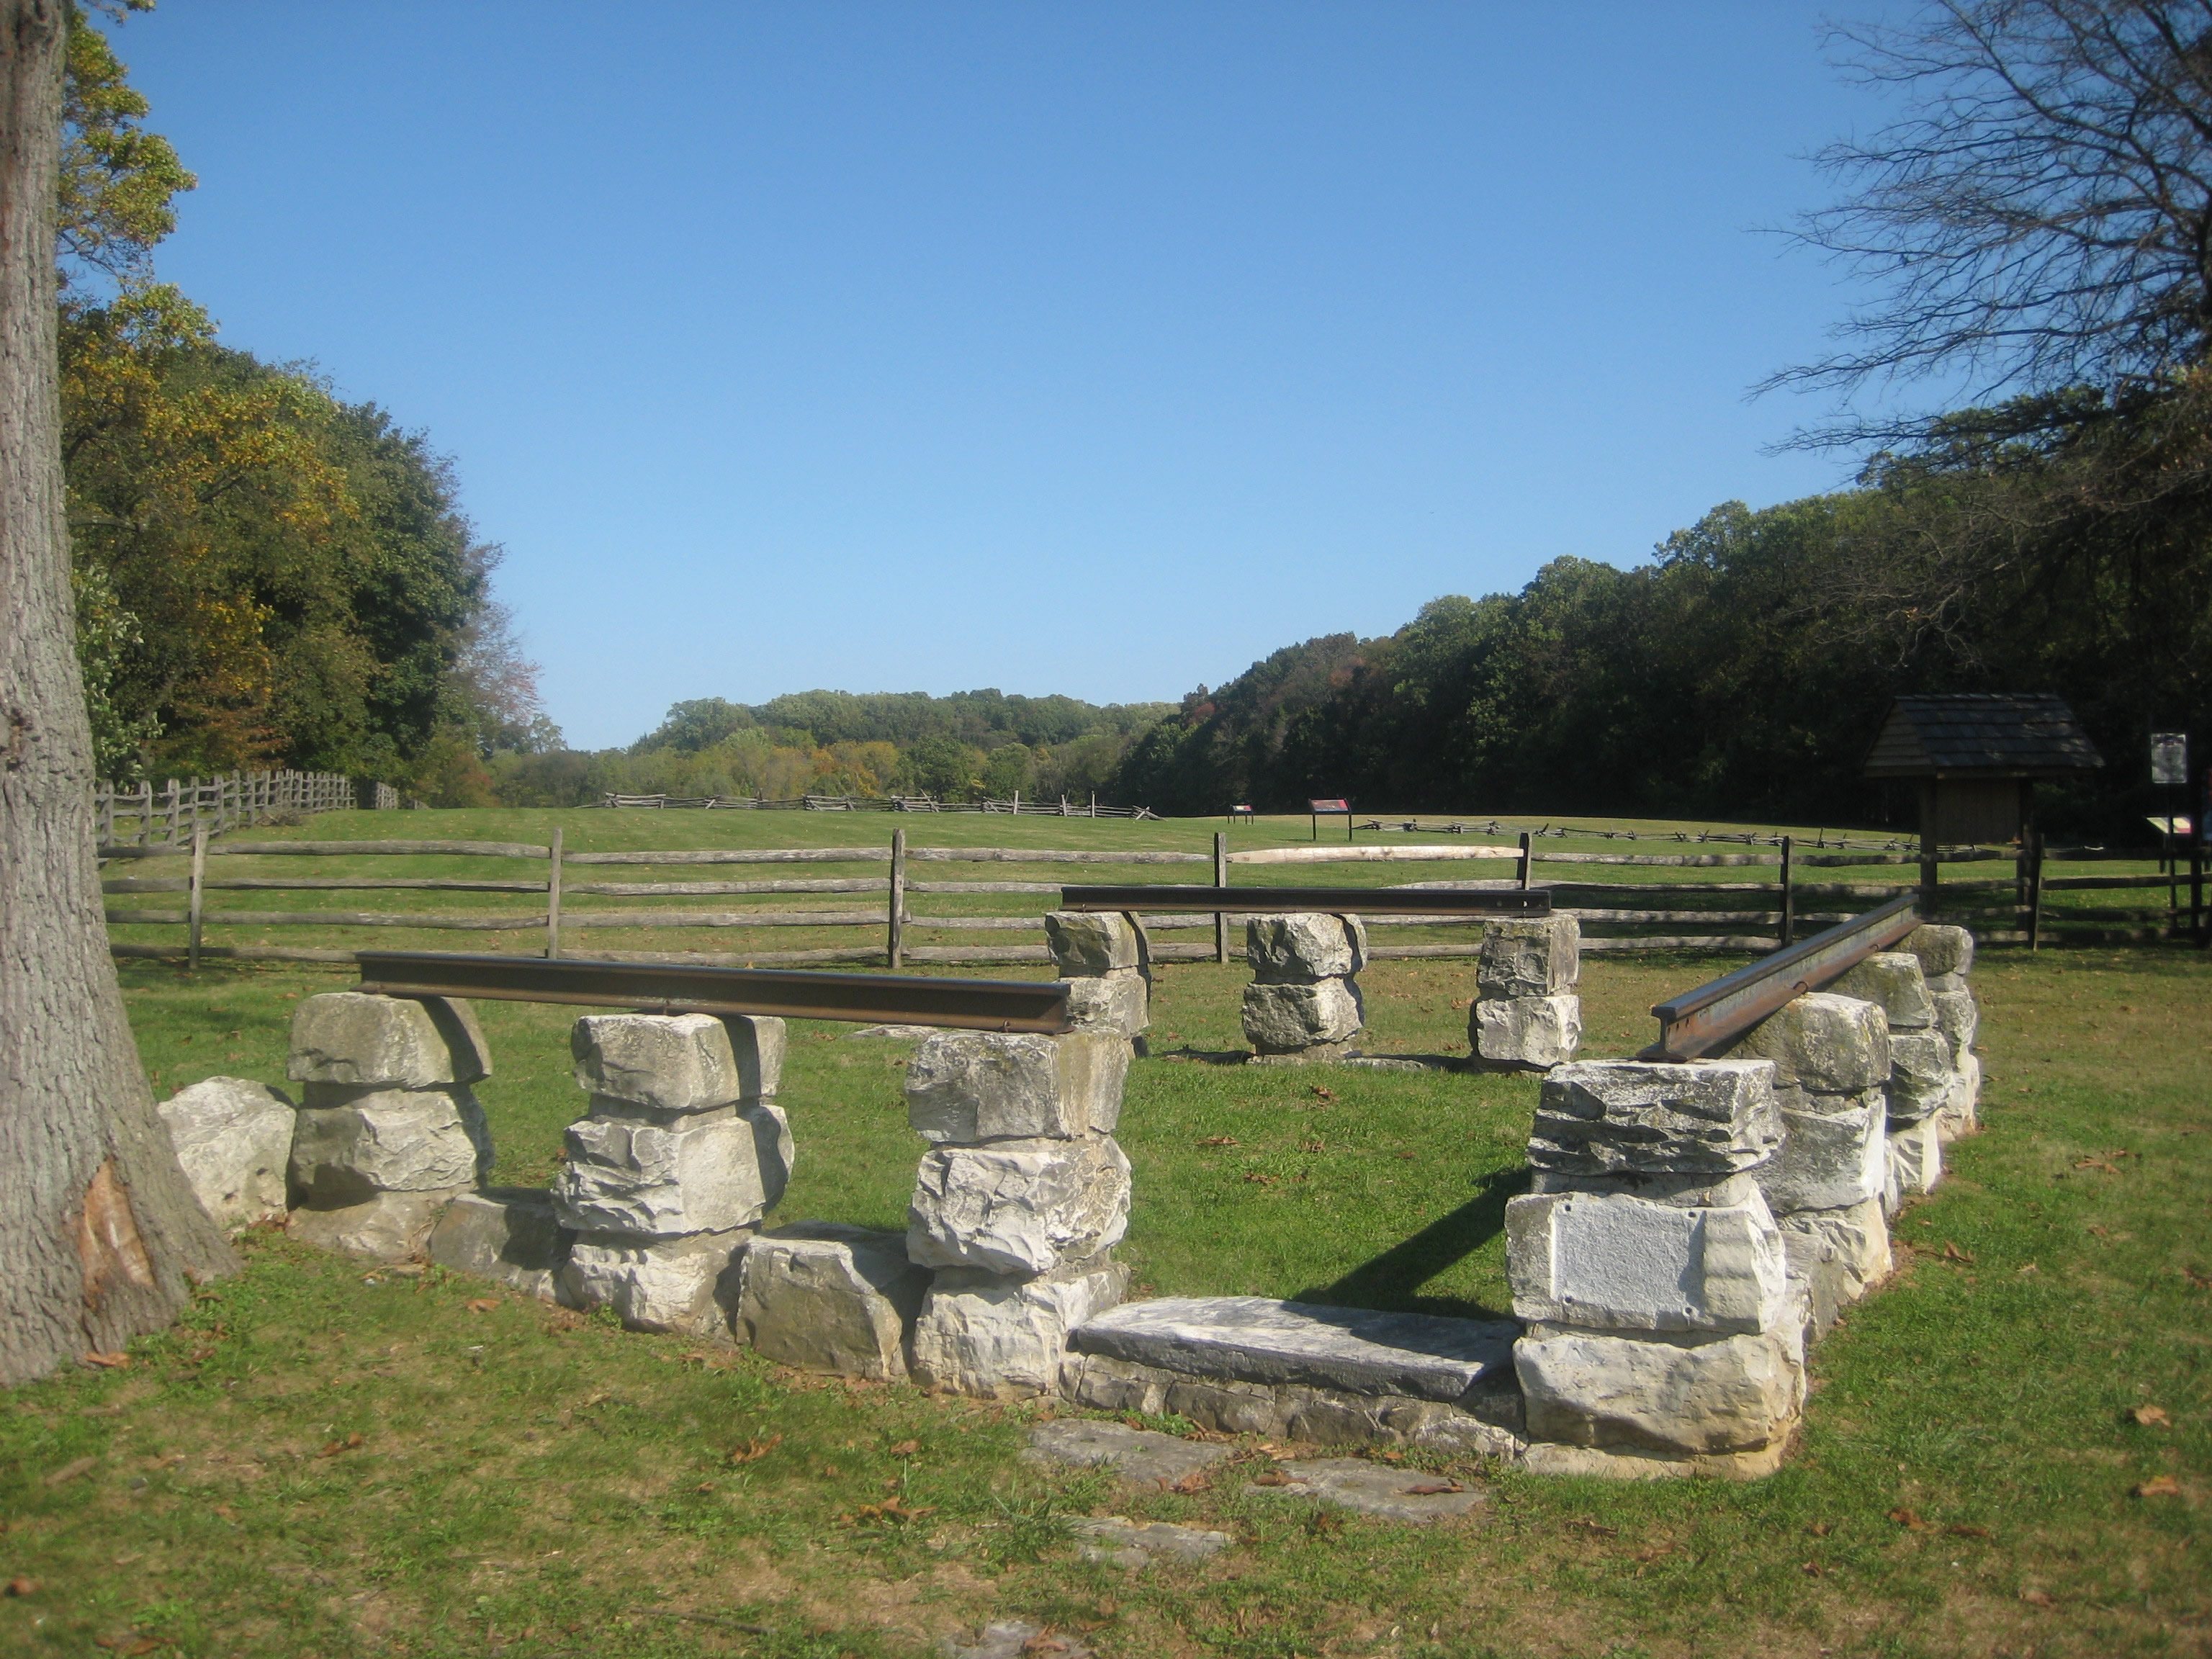 Fences and Structure at Paoli Battlefield